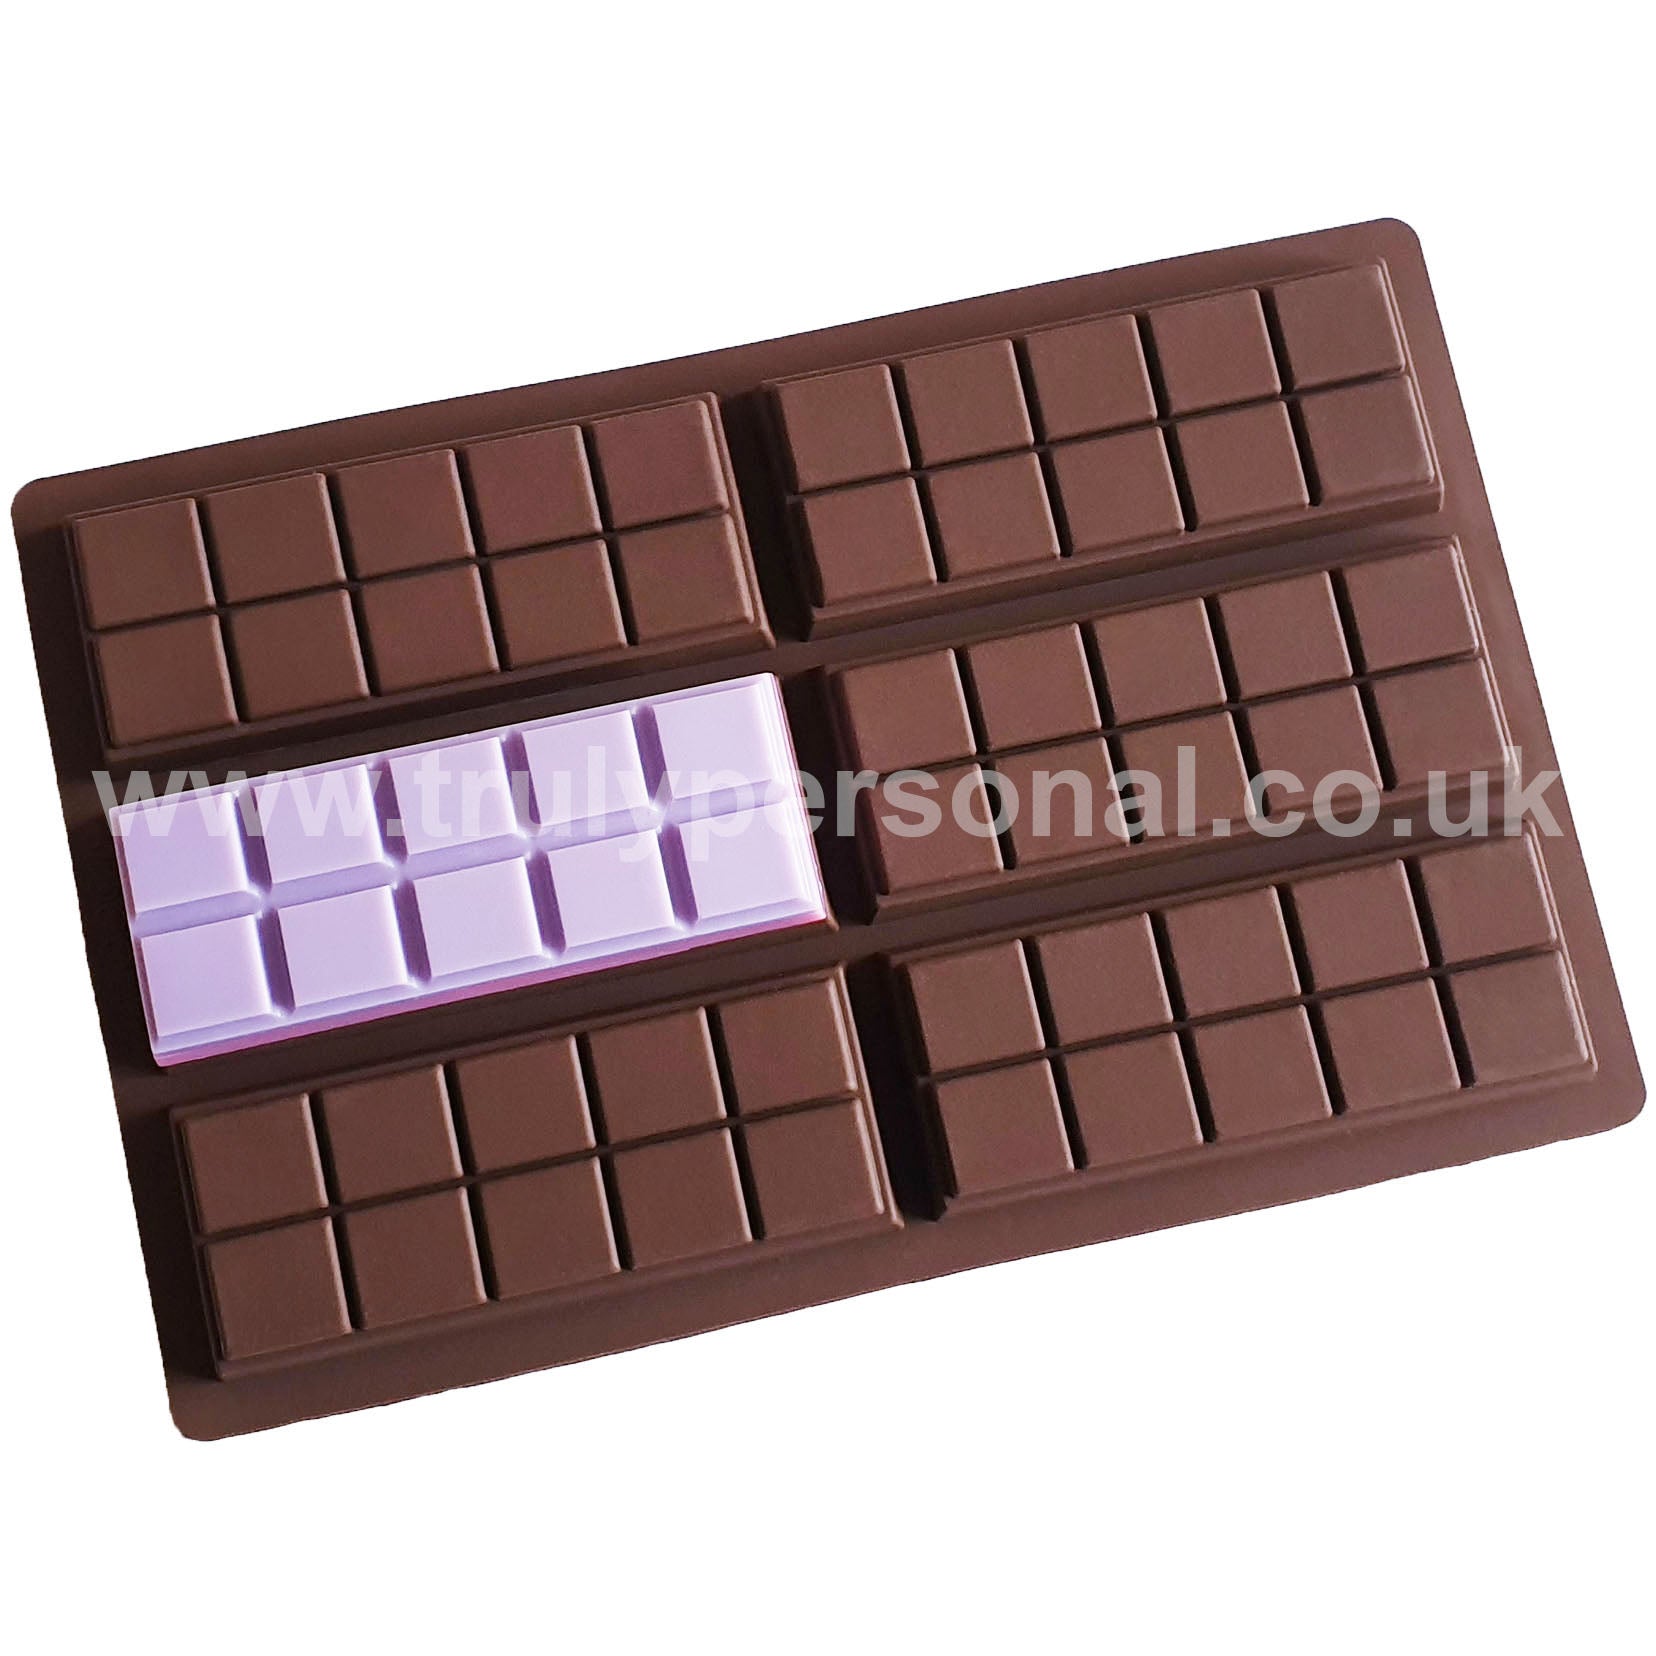 Snap Bar Silicone Mould - 6 x 10 | Wax Melts | Truly Personal Ltd